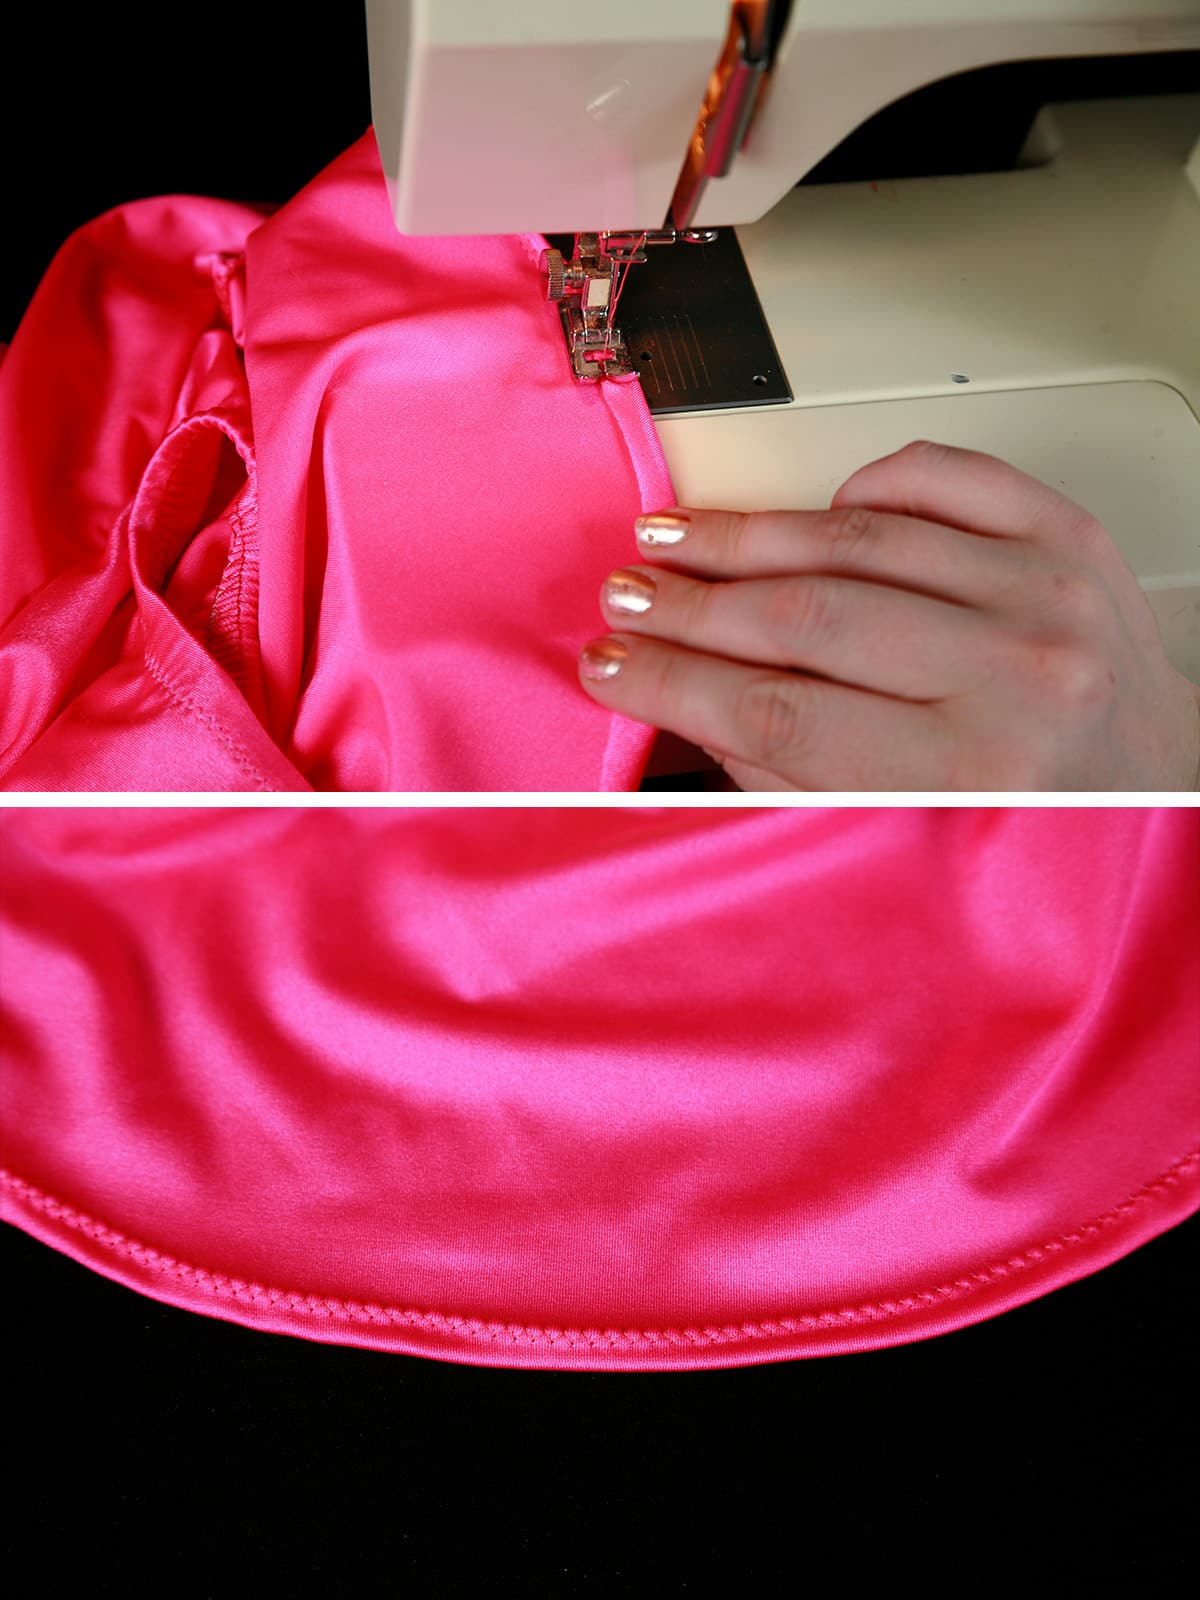 A two part image showing a flat zig zag hem being applied to a pink spandex skating skirt.